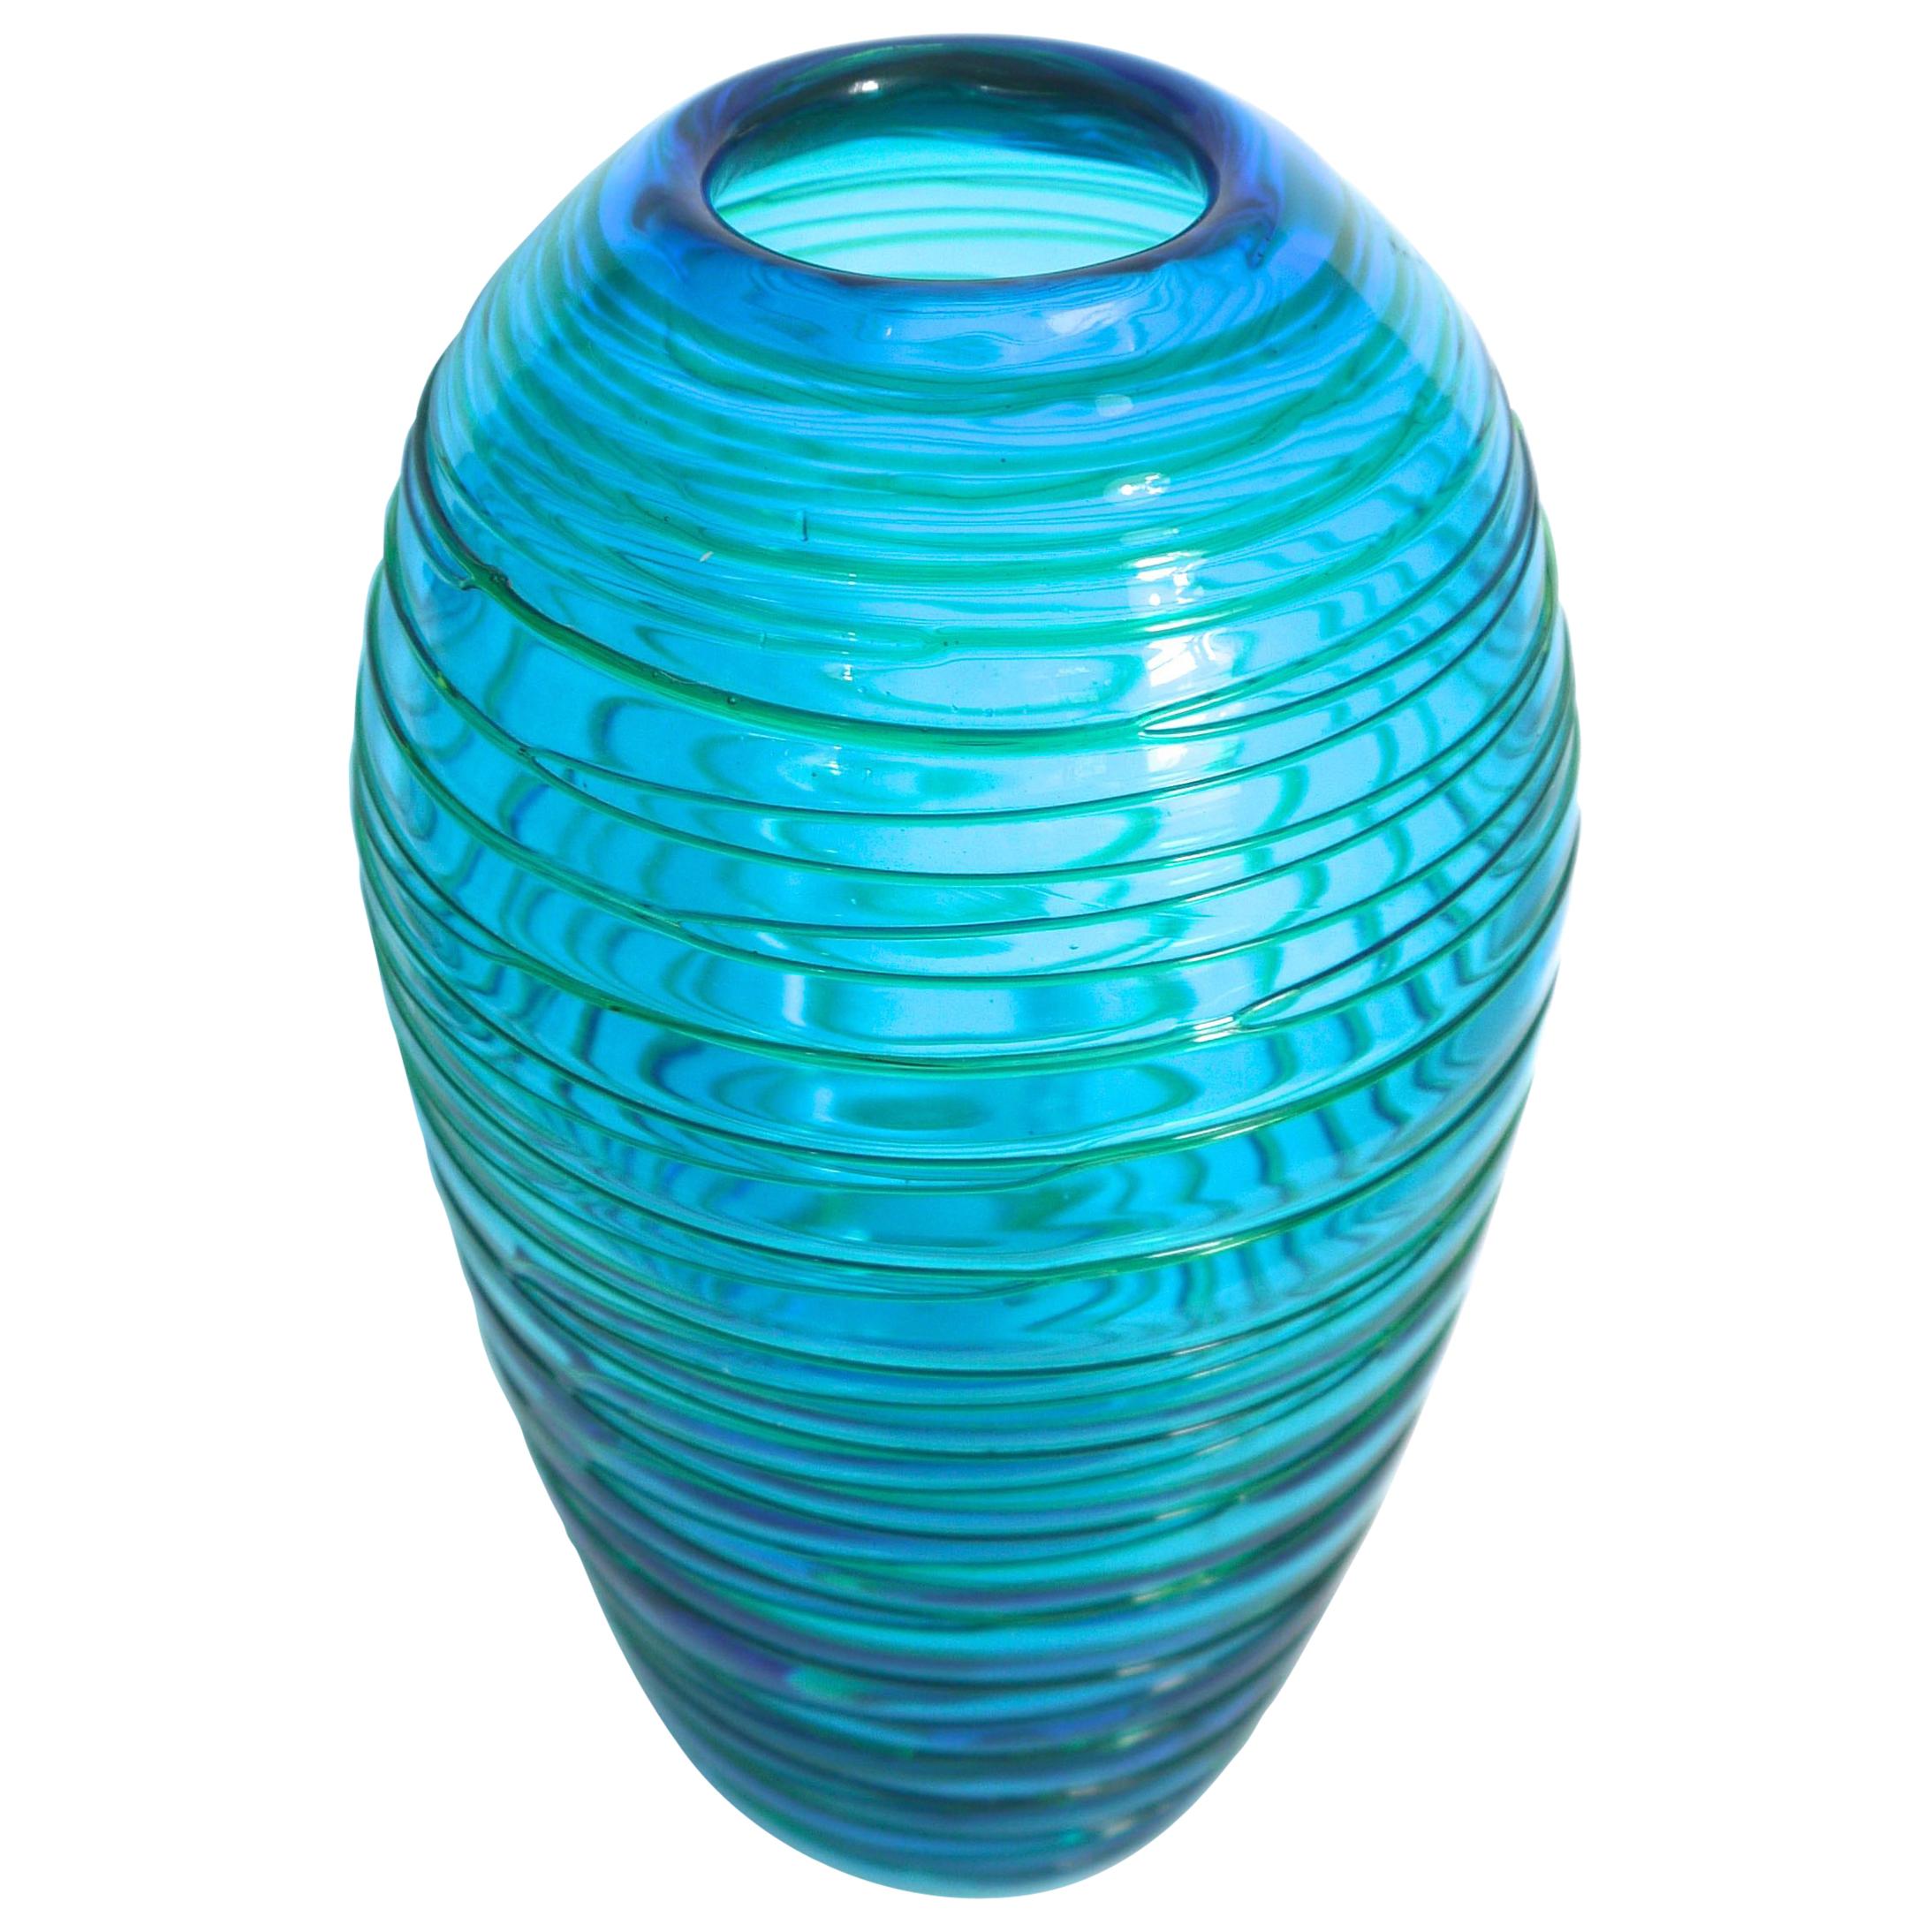 Fulvio Bianconi for Venini 1970s Turquoise Vase with Applied Lines For Sale